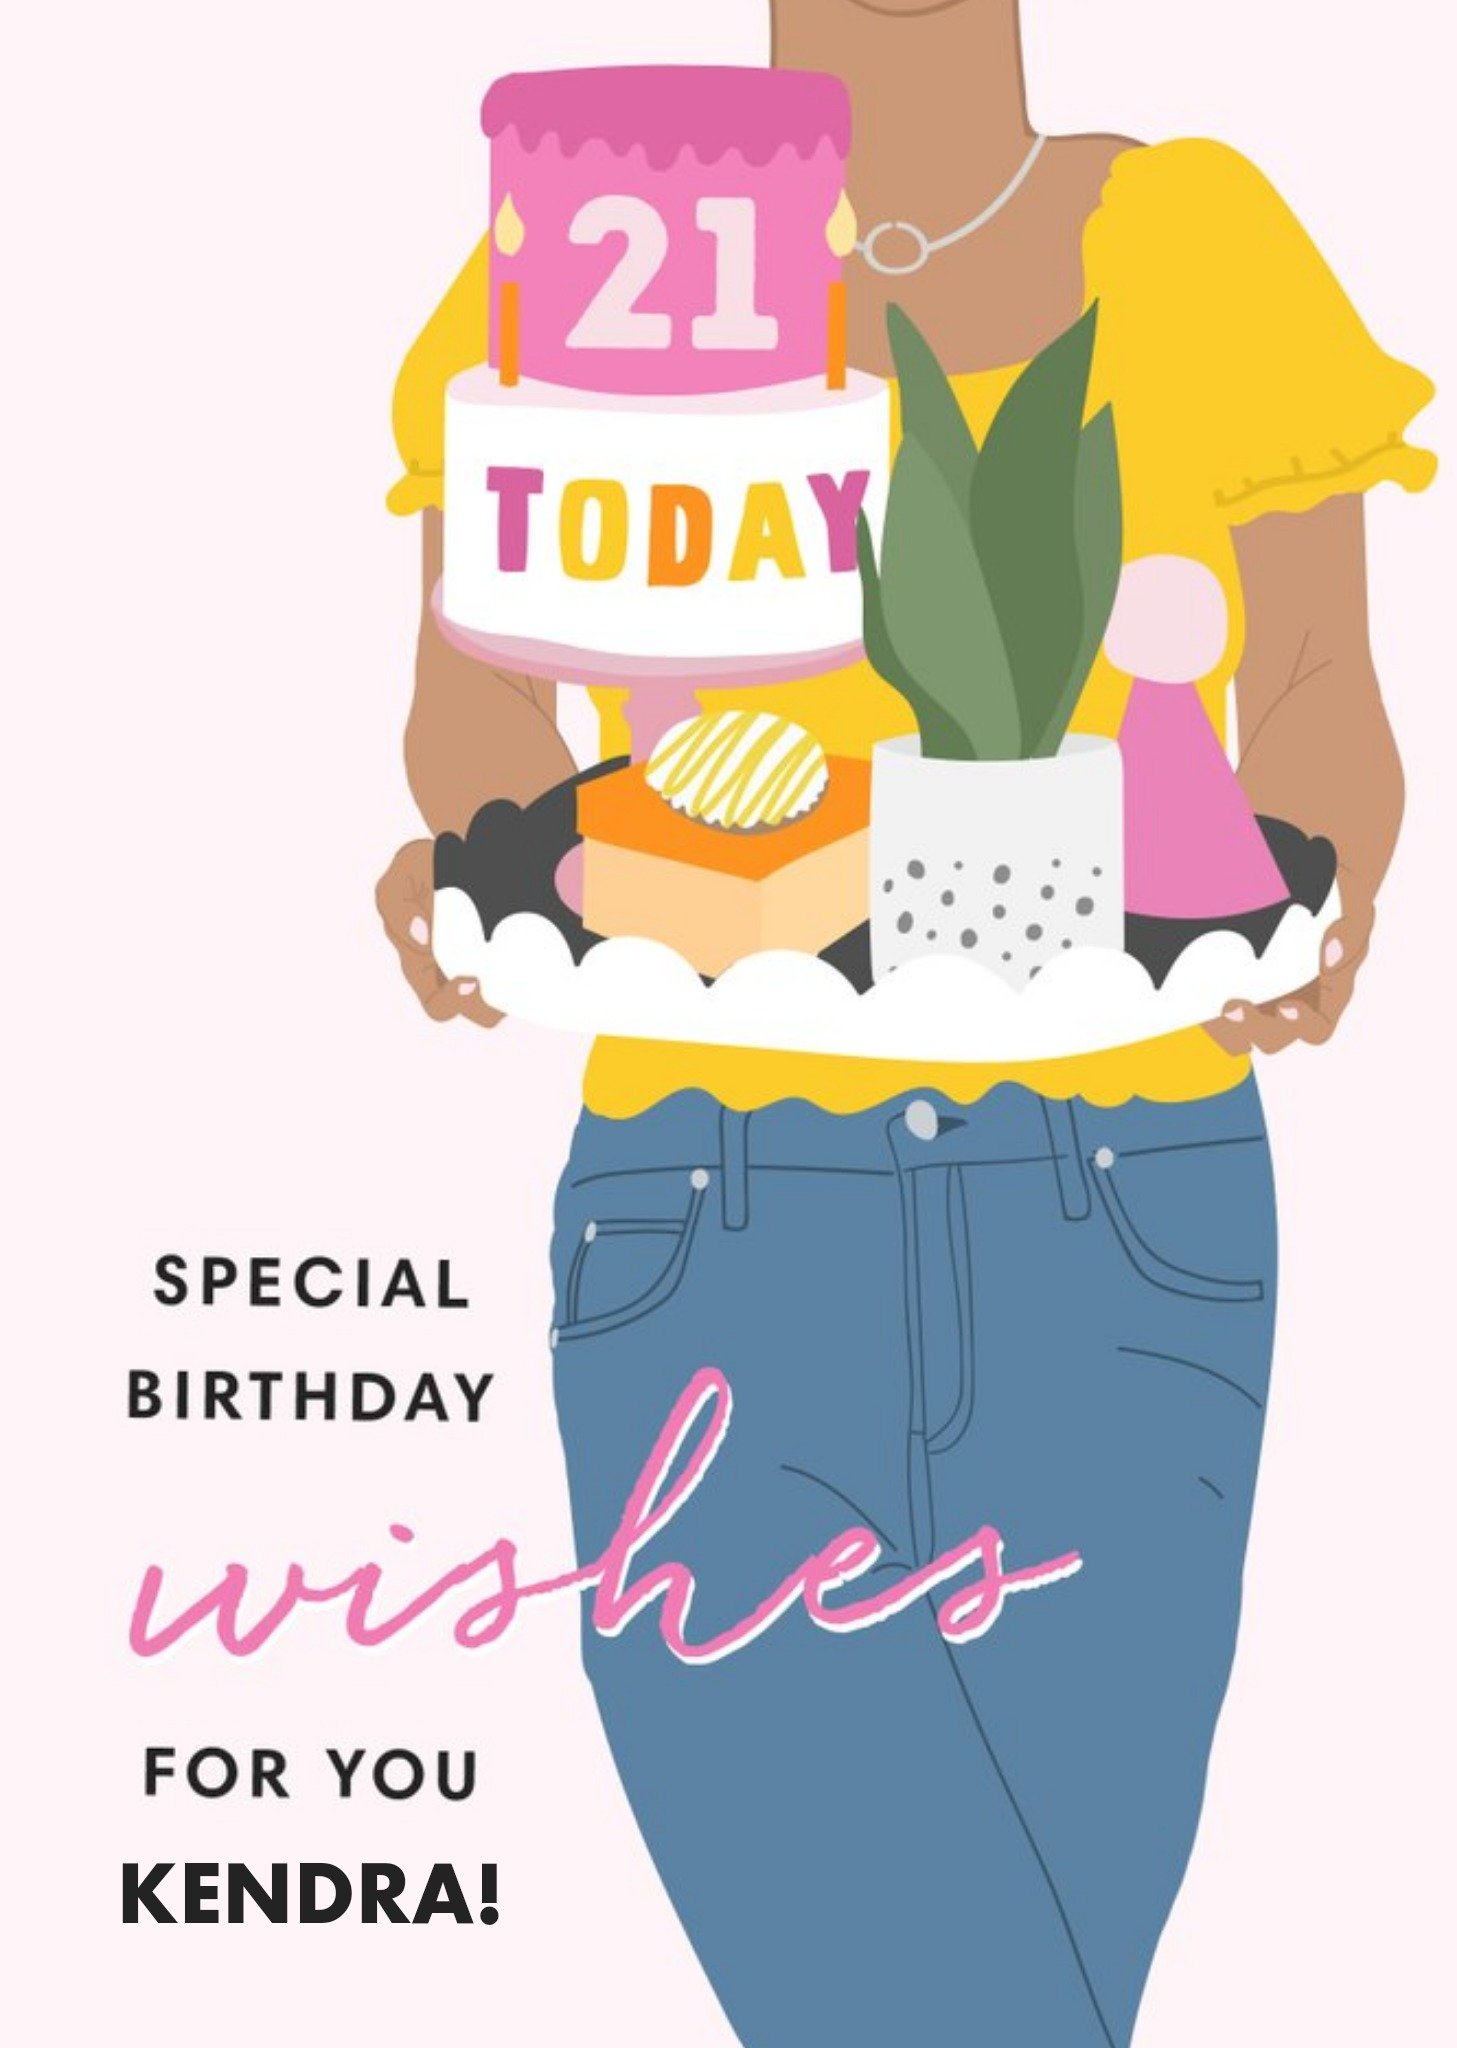 Moonpig Illustrated 21 Today Special Birthday Wishes Card, Large